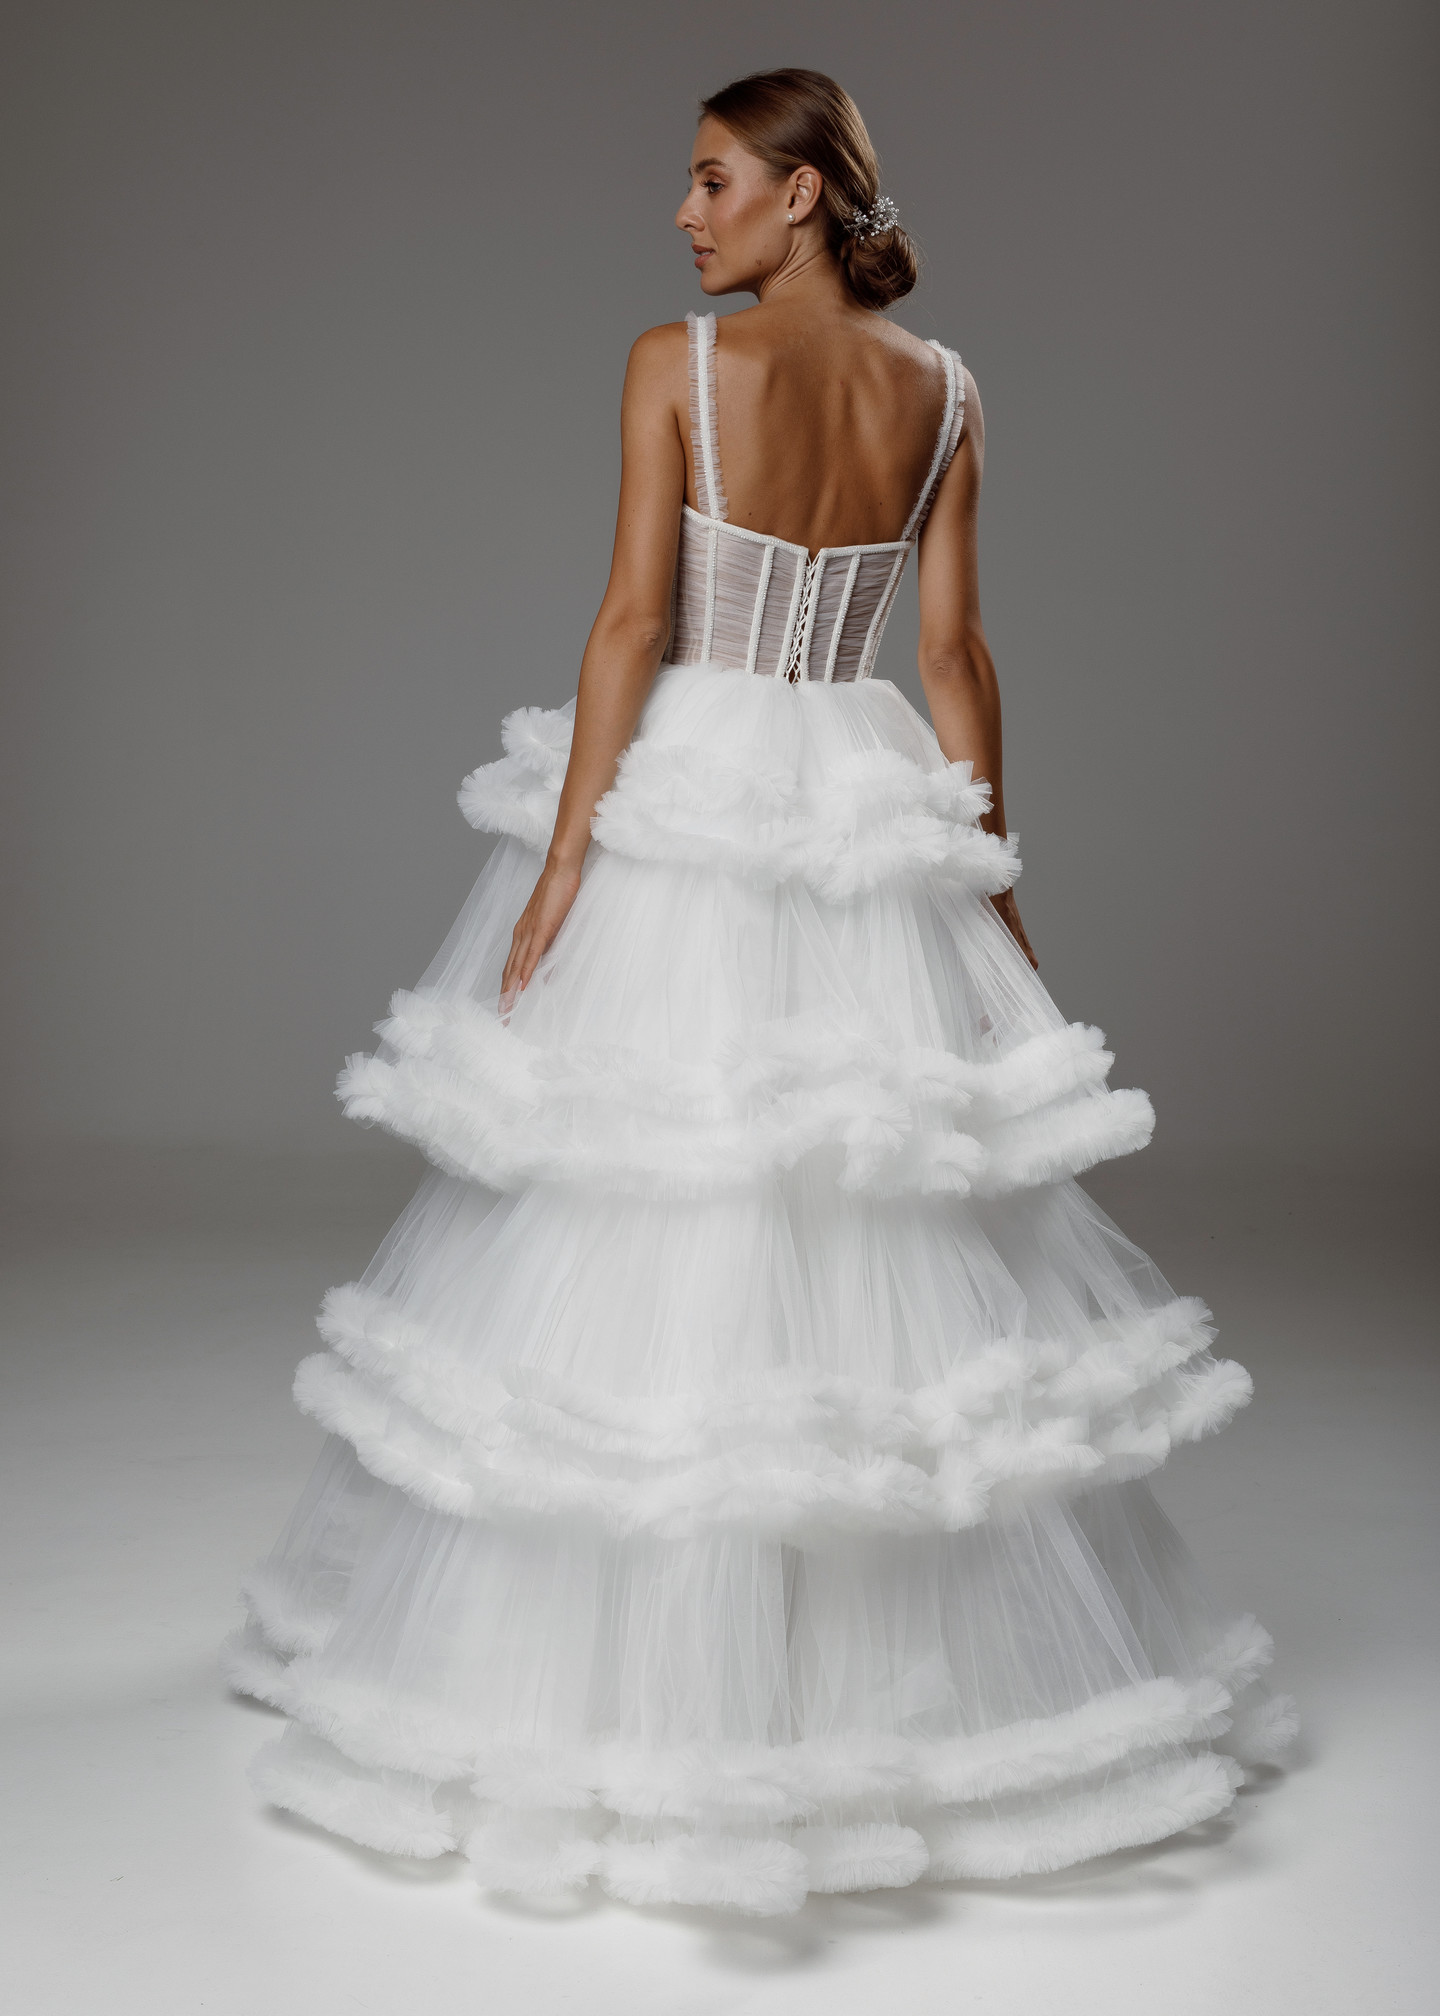 Aurora gown, 2020, couture, dress, bridal, off-white, tulle, embroidery, A-line, lacing corset, archive